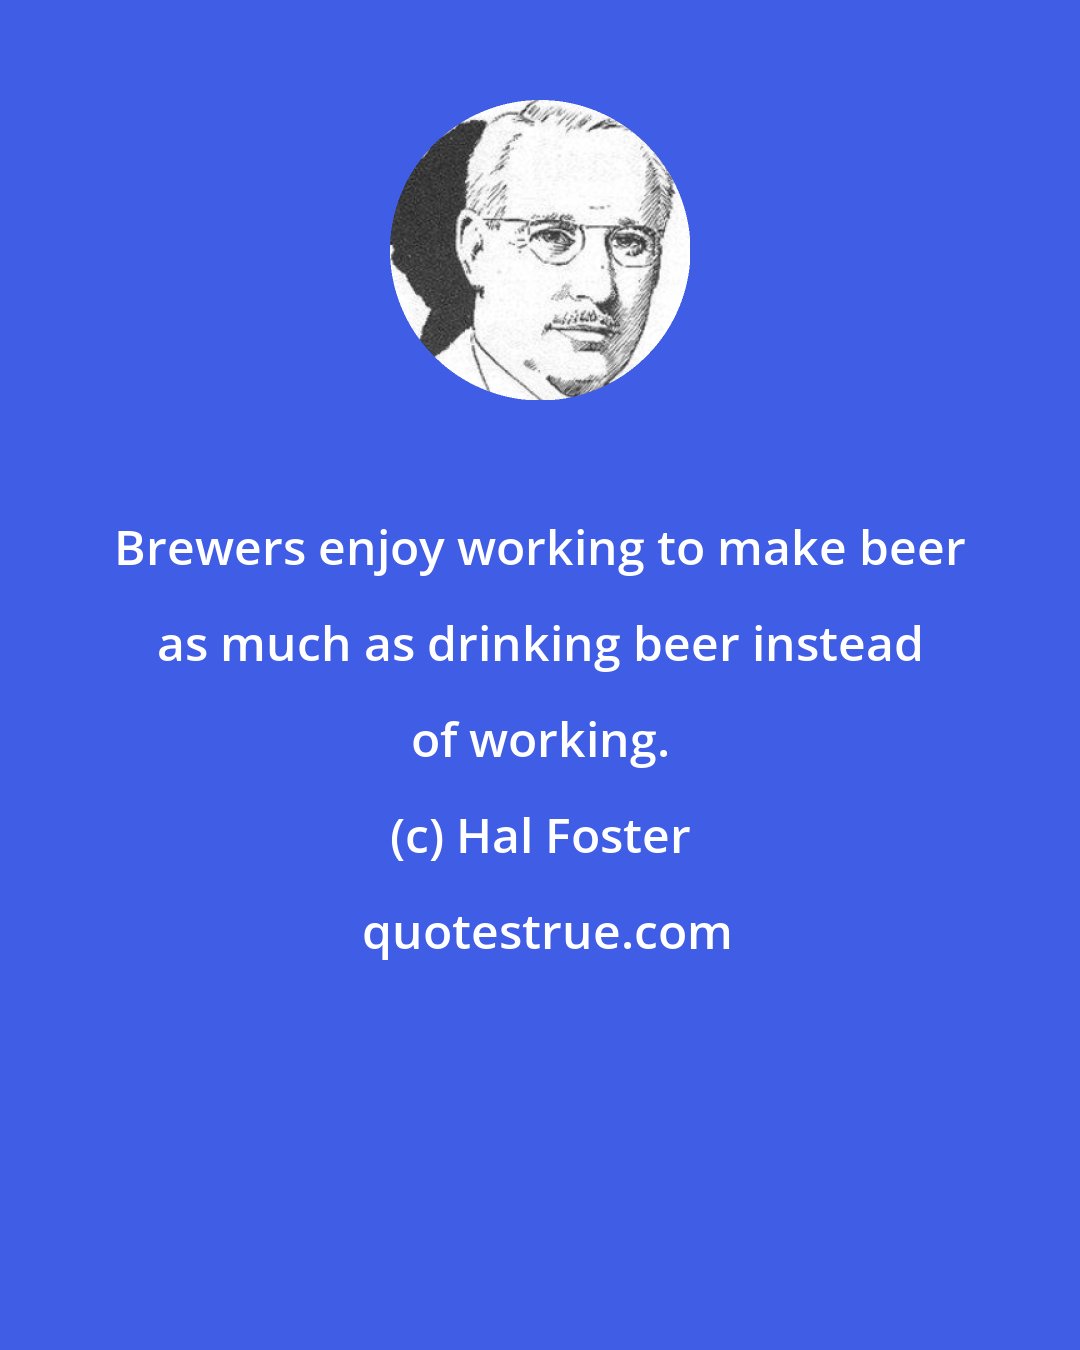 Hal Foster: Brewers enjoy working to make beer as much as drinking beer instead of working.